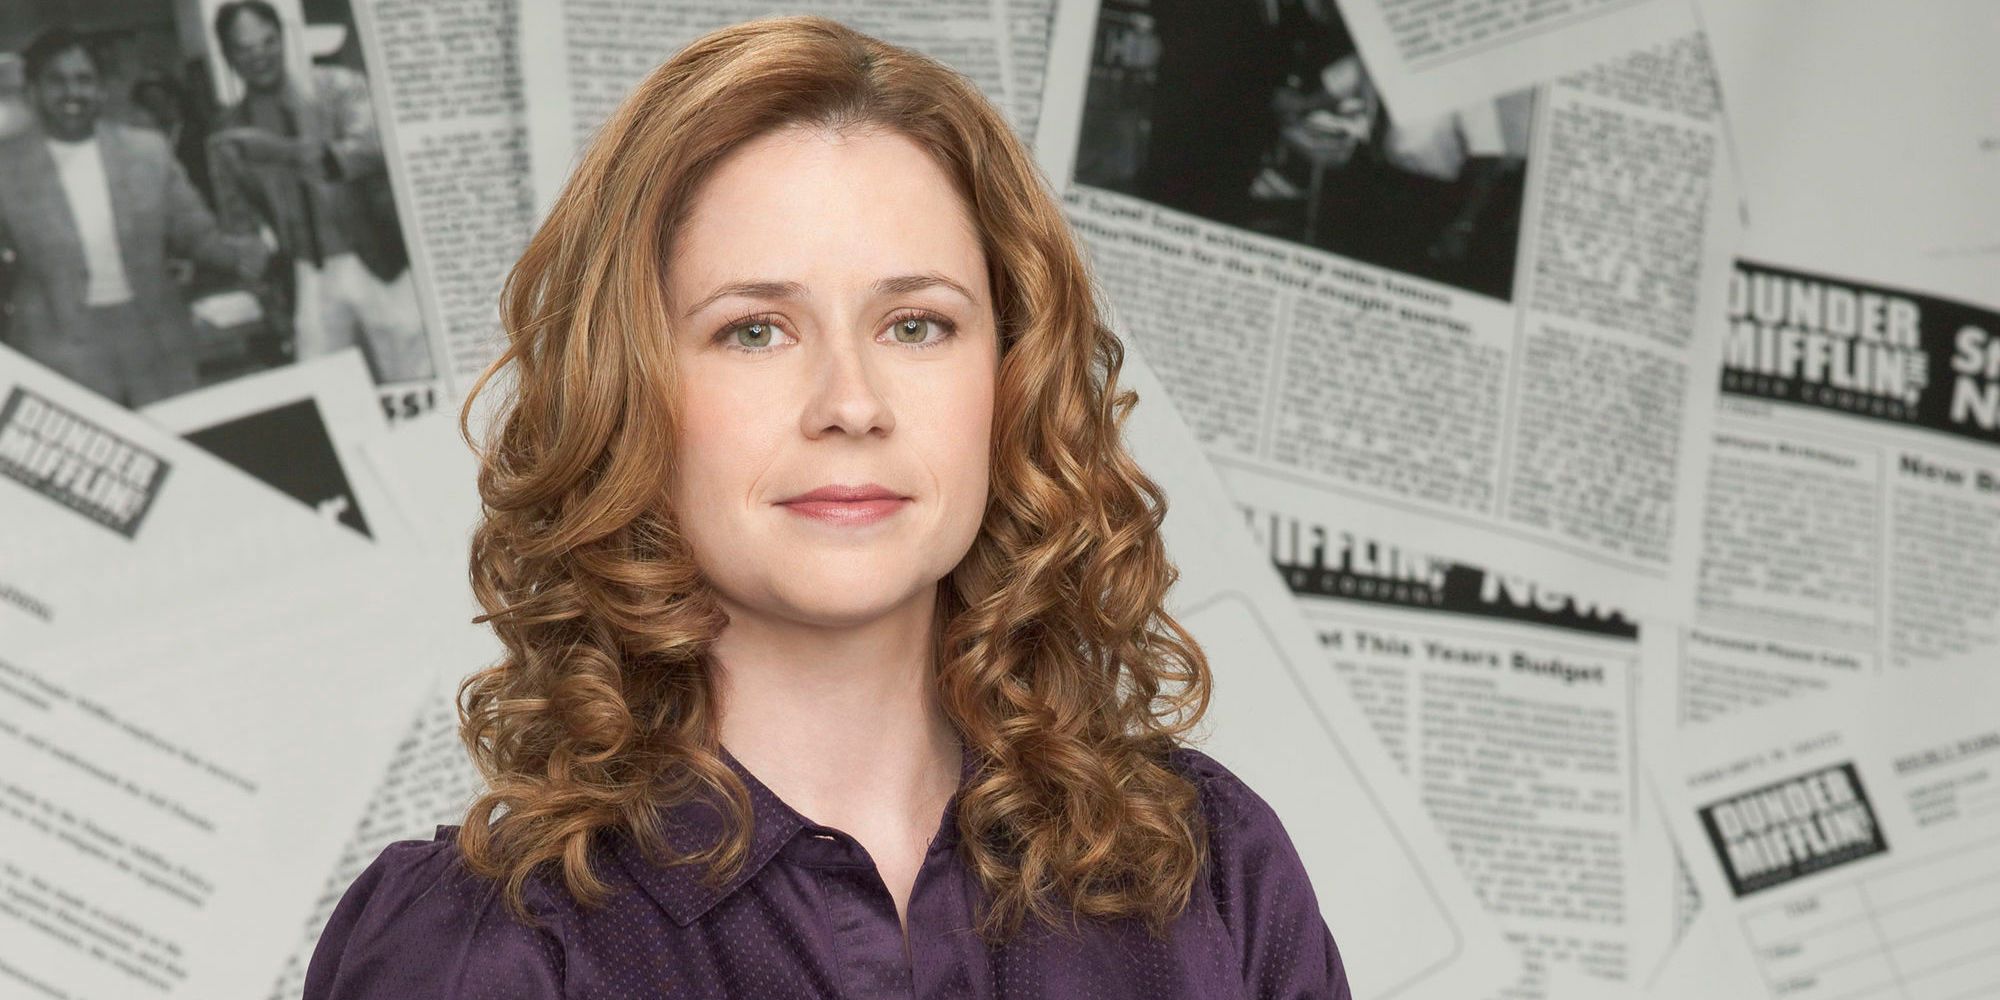 An image of Pam Beesley in The Office